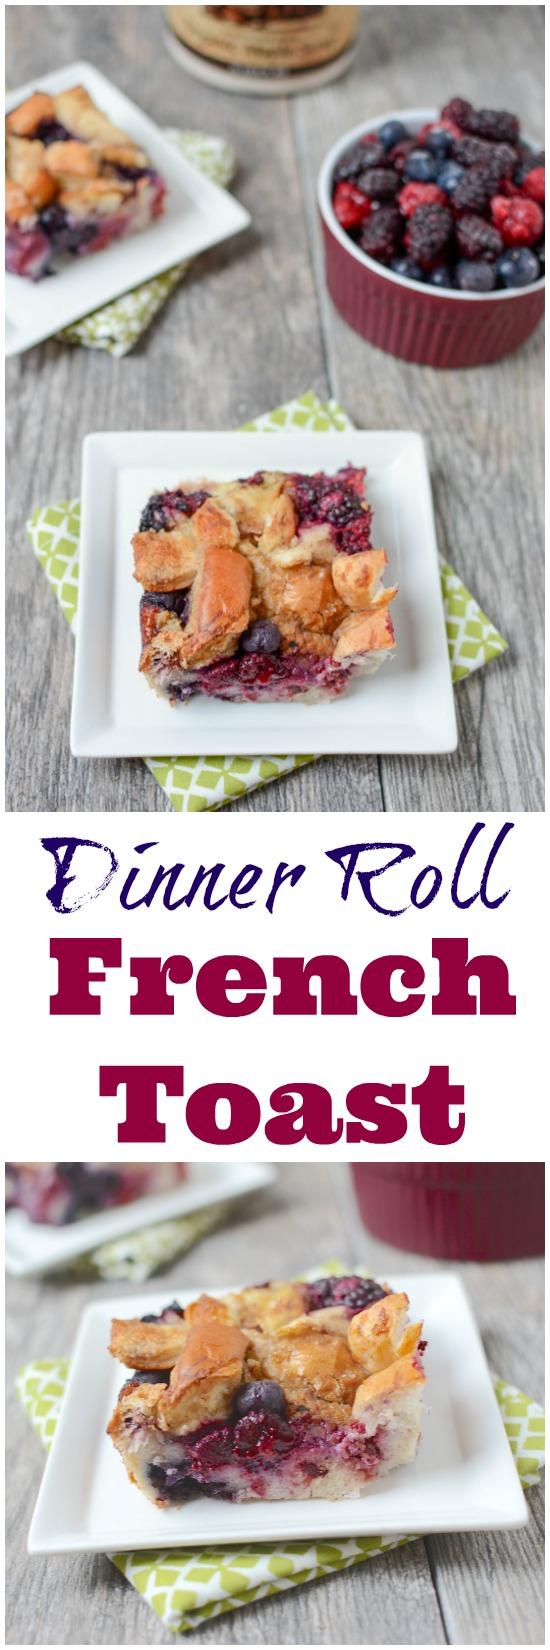 This Dinner Roll French Toast Bake is the perfect recipe to use up leftover dinner rolls after a holiday meal. Prep the night before, let it sit in the fridge overnight and enjoy it for breakfast in the morning.